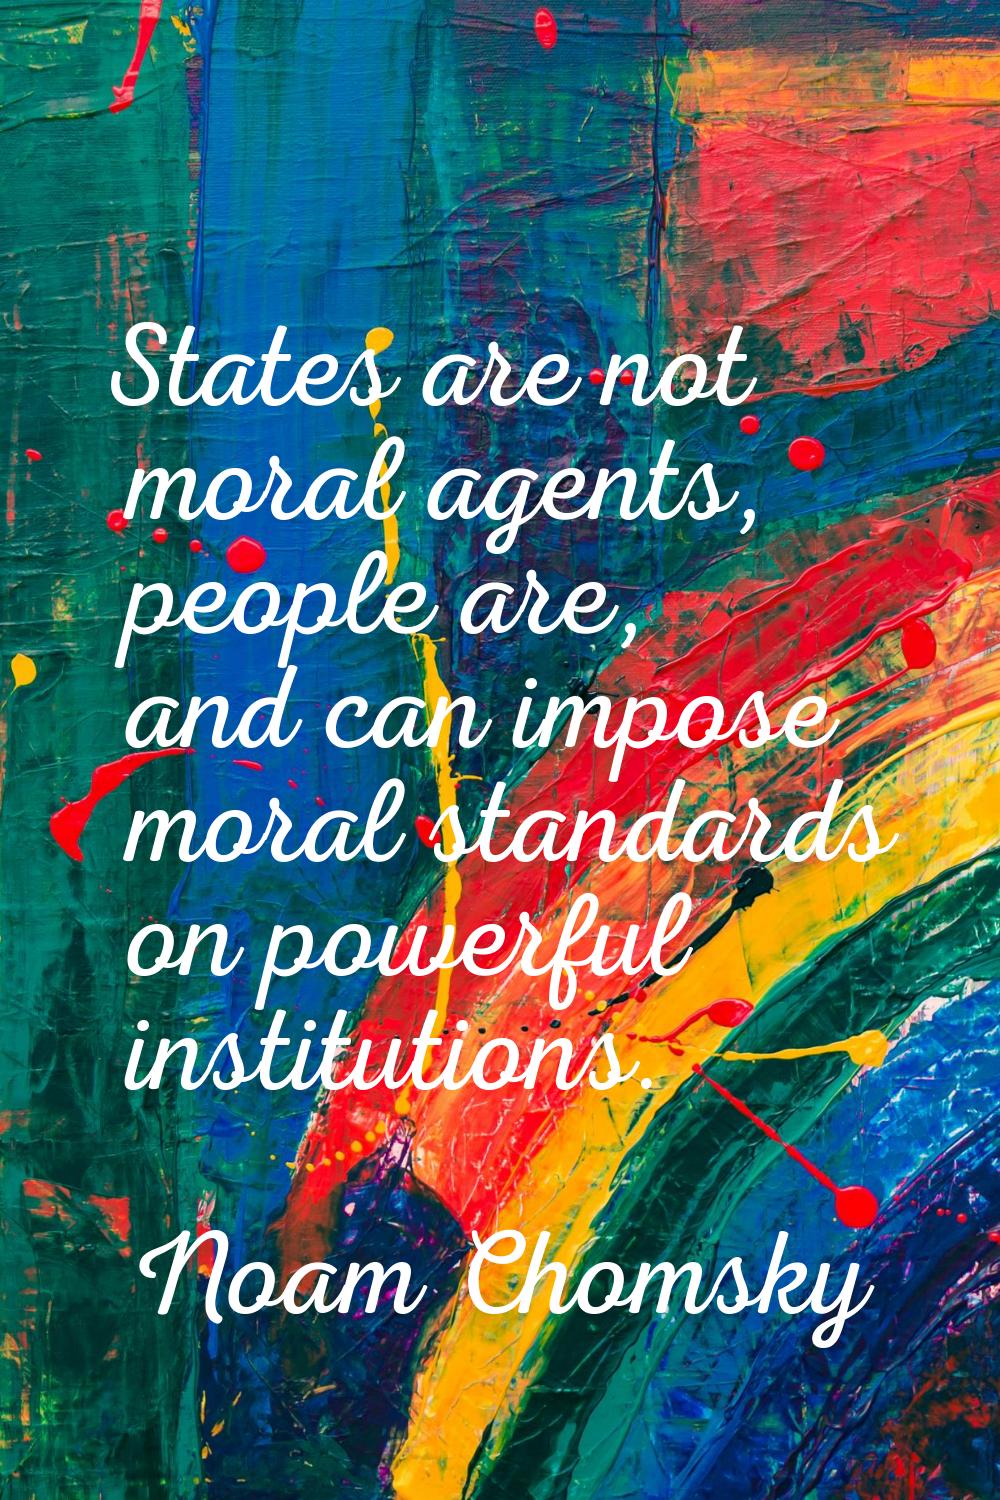 States are not moral agents, people are, and can impose moral standards on powerful institutions.